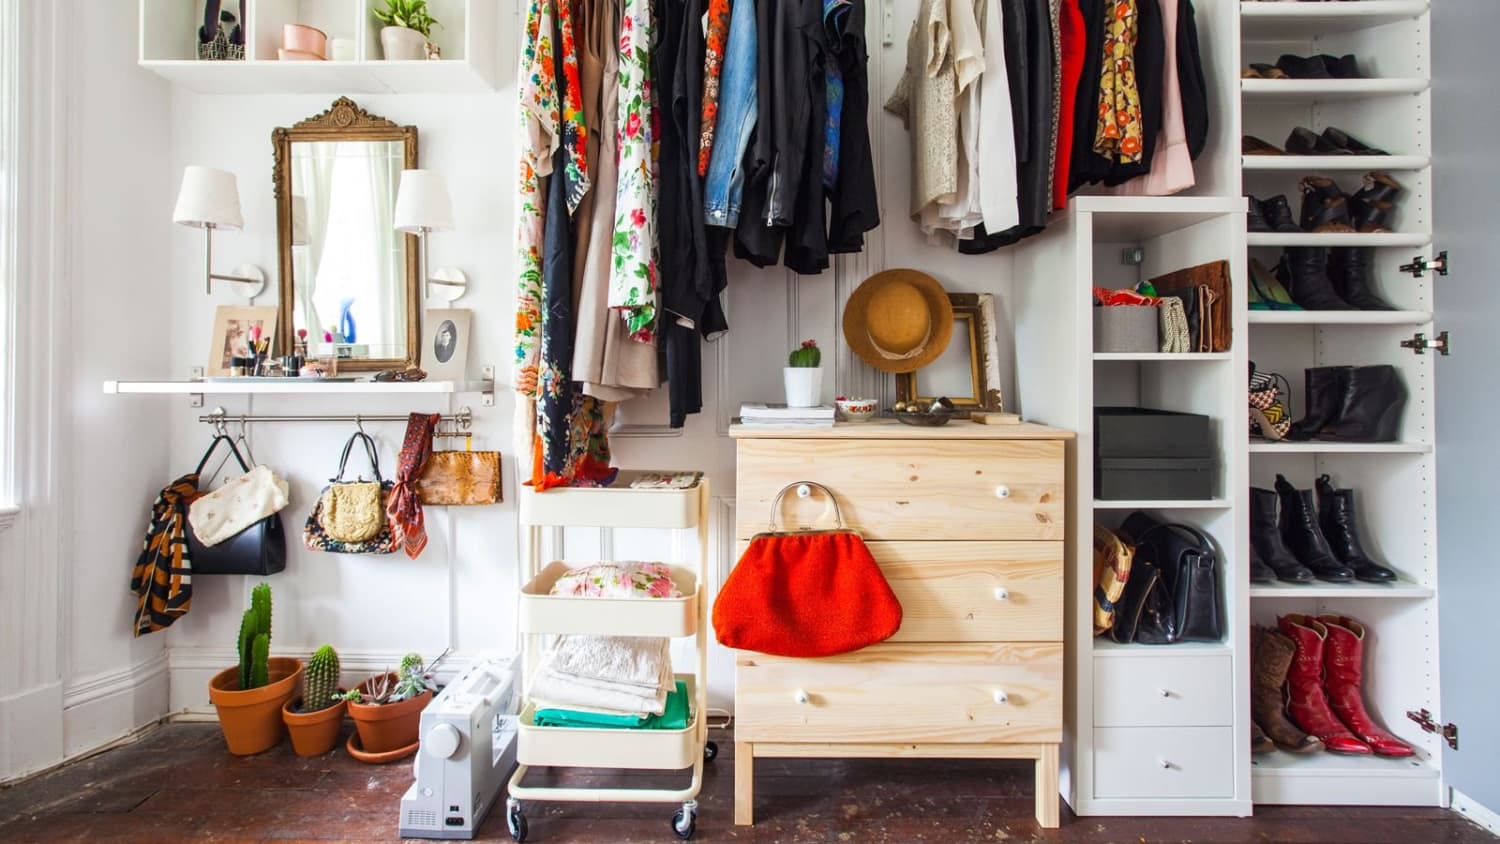 How To Organize a Closet in a Non-Permanent Way (No Drilling and Perfect  For Renters!) - A Beautiful Mess